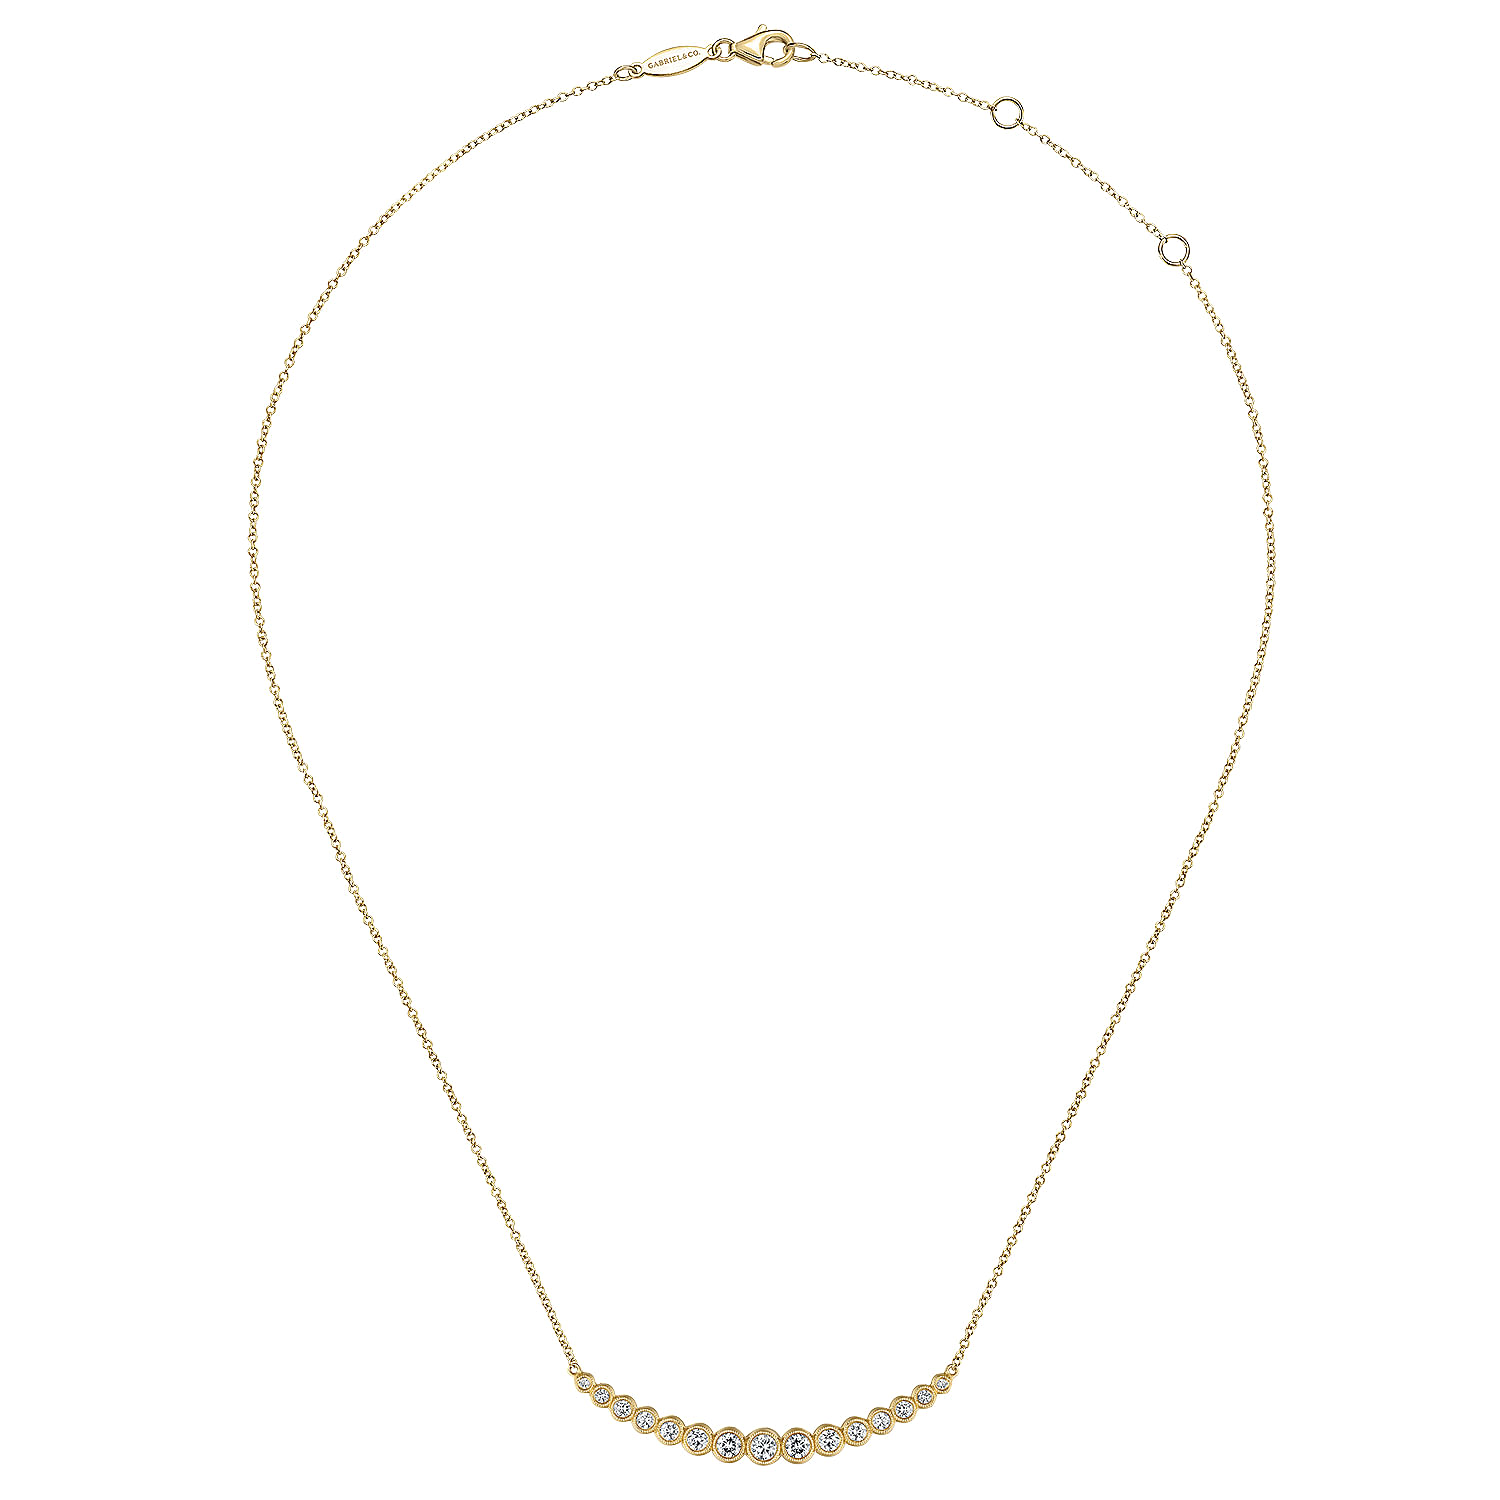 14K Yellow Gold Curved Bar Necklace with Bezel Set Round Diamonds